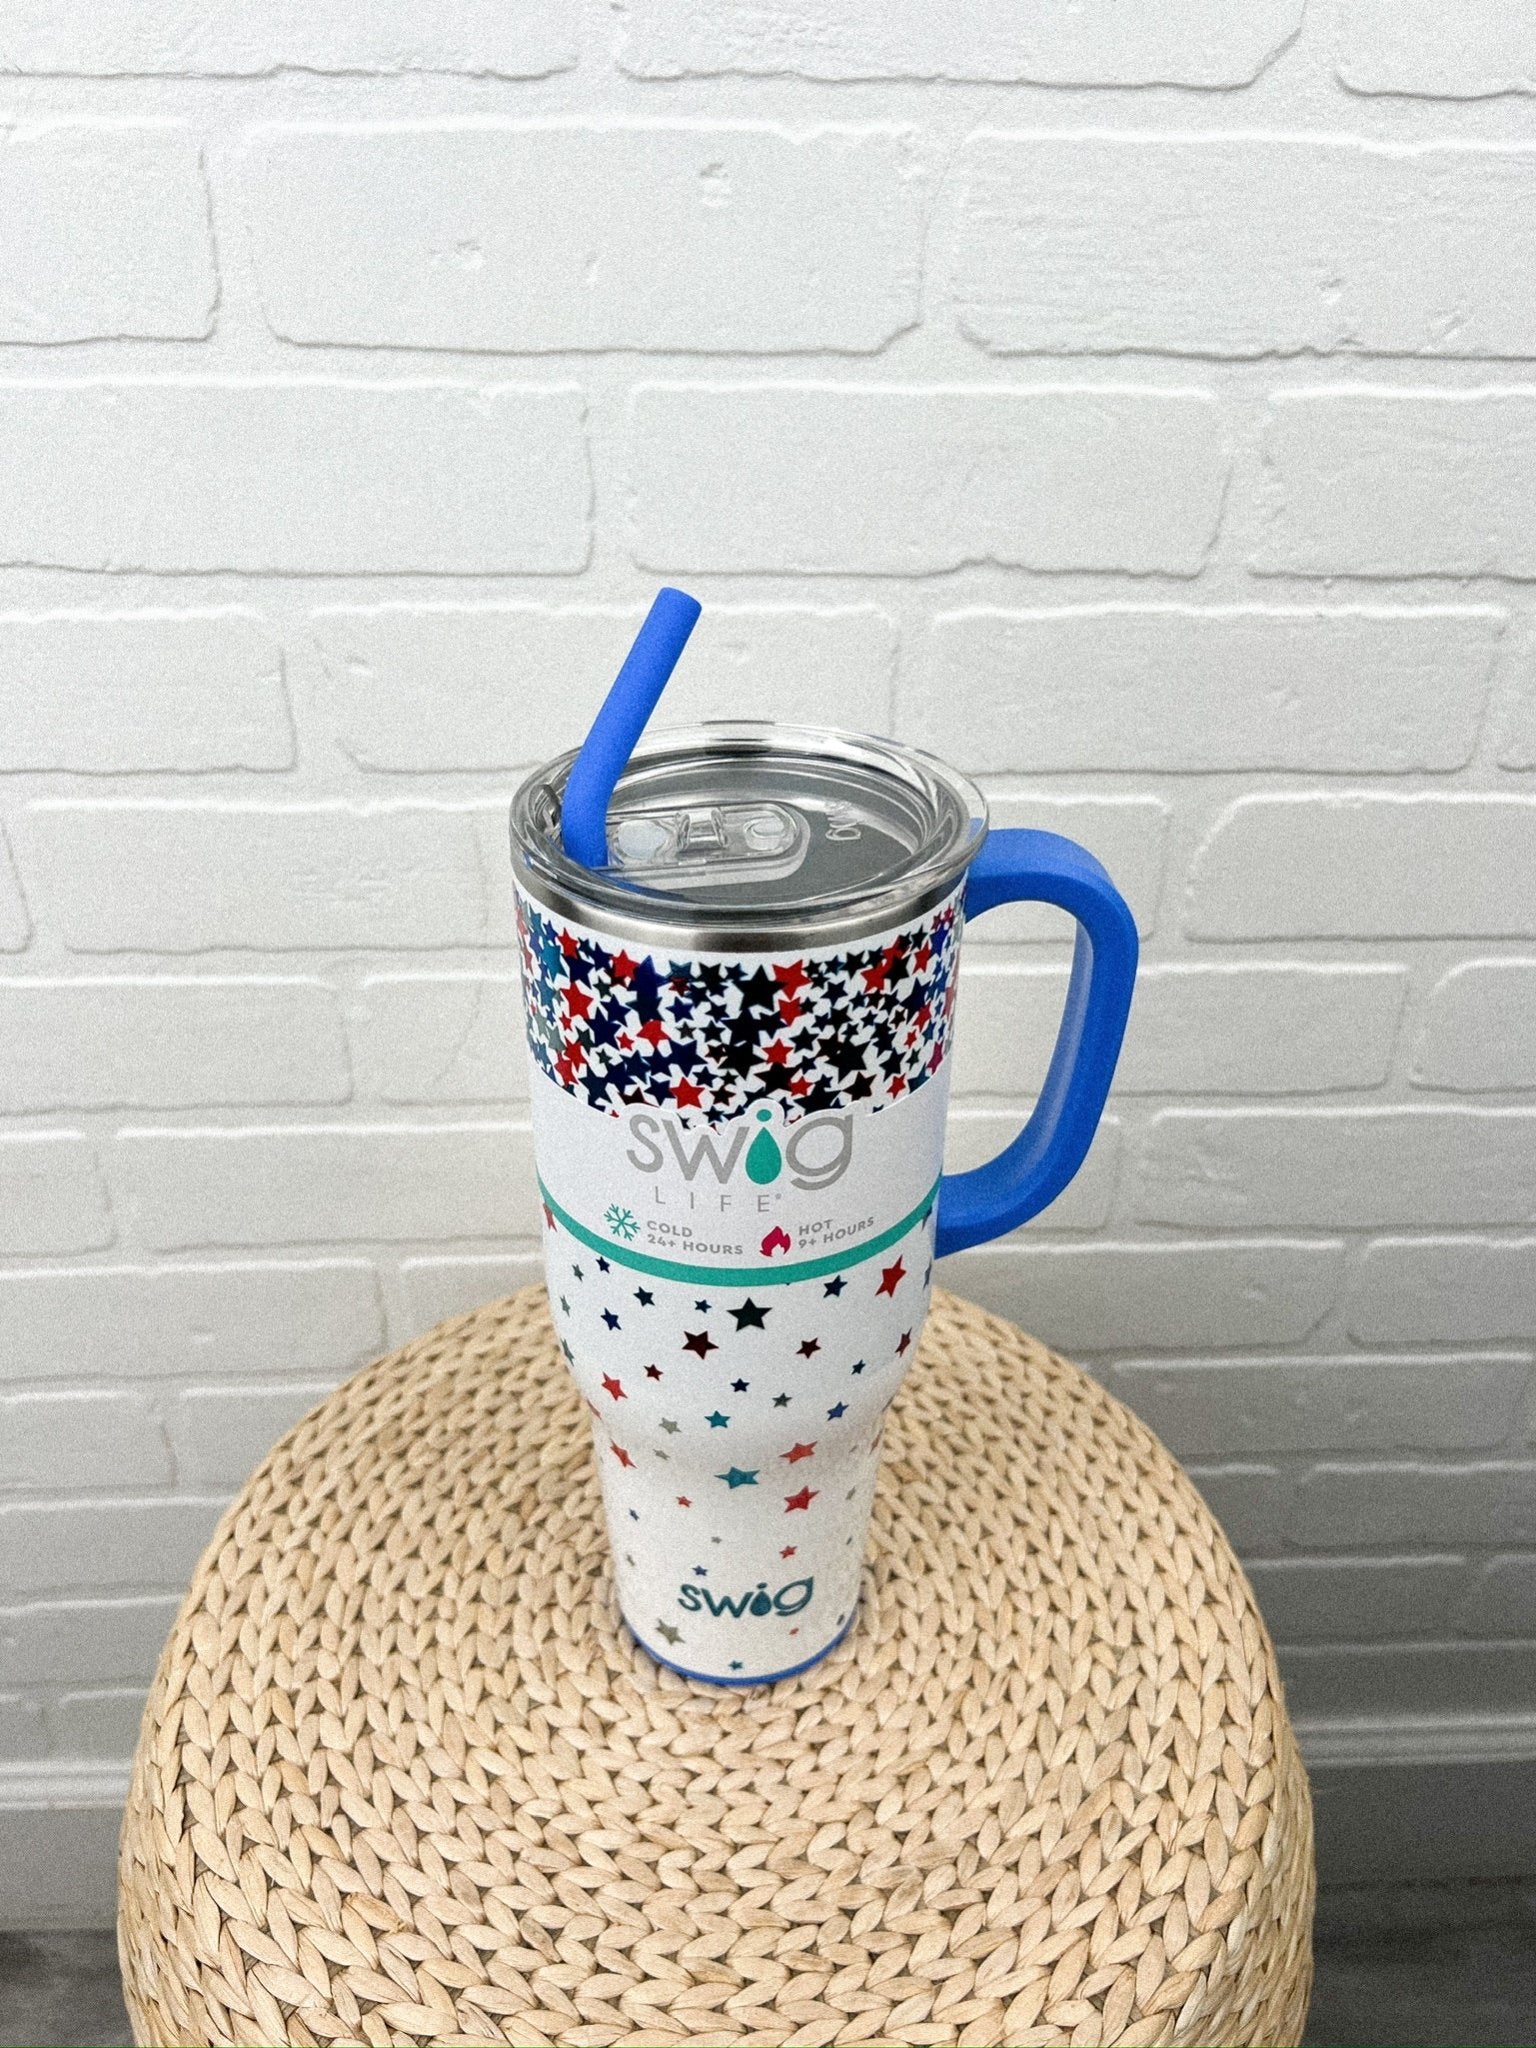 Swig Star Spangled 40oz tumbler - Stylish Cup - Trendy American Summer Fashion at Lush Fashion Lounge Boutique in Oklahoma